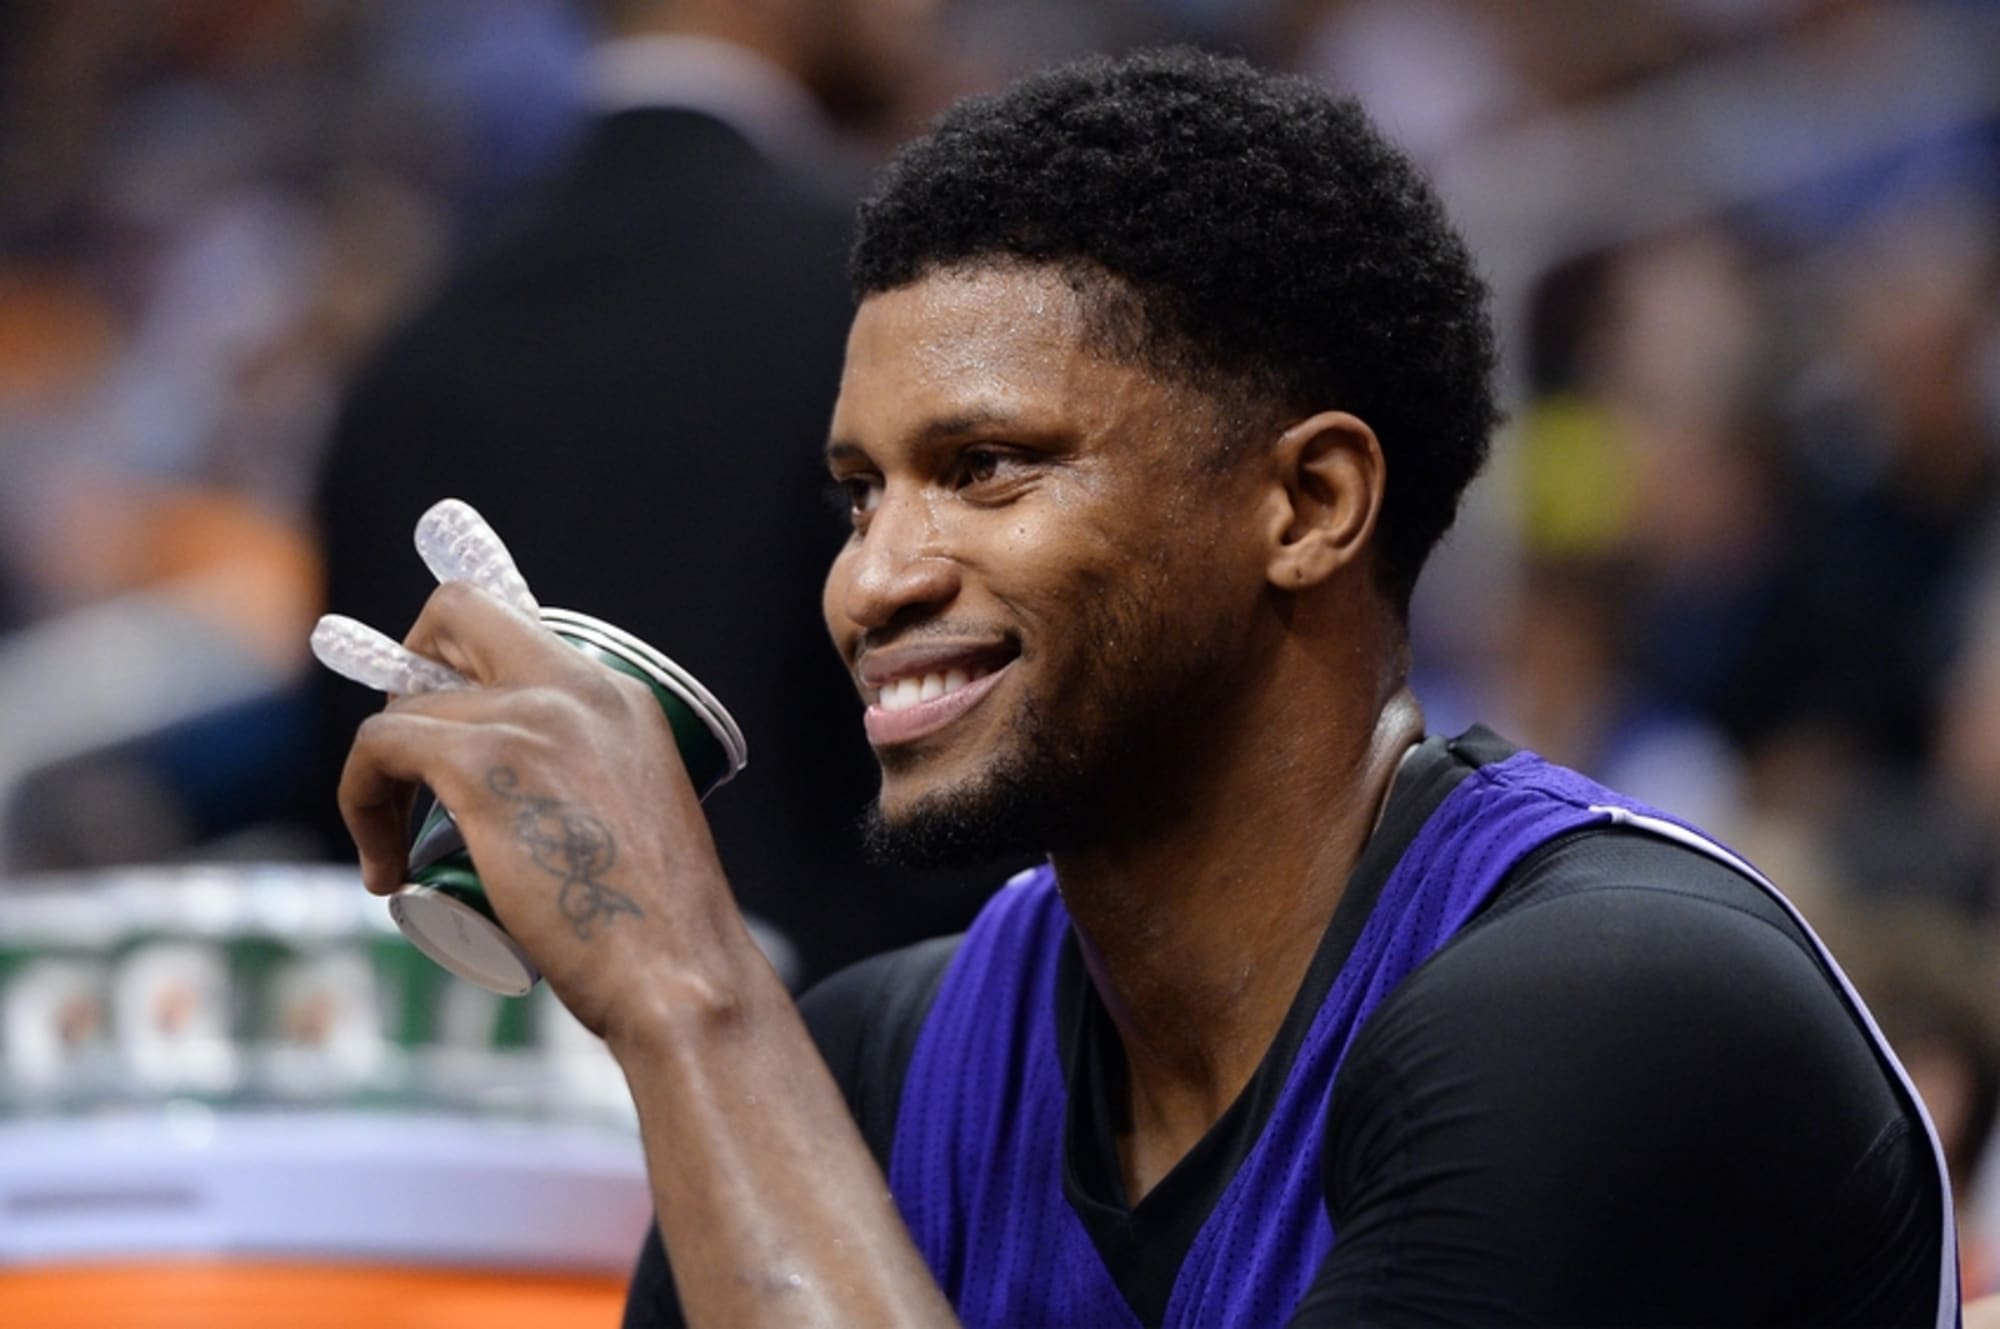 rudy gay lakers 31 points in a season